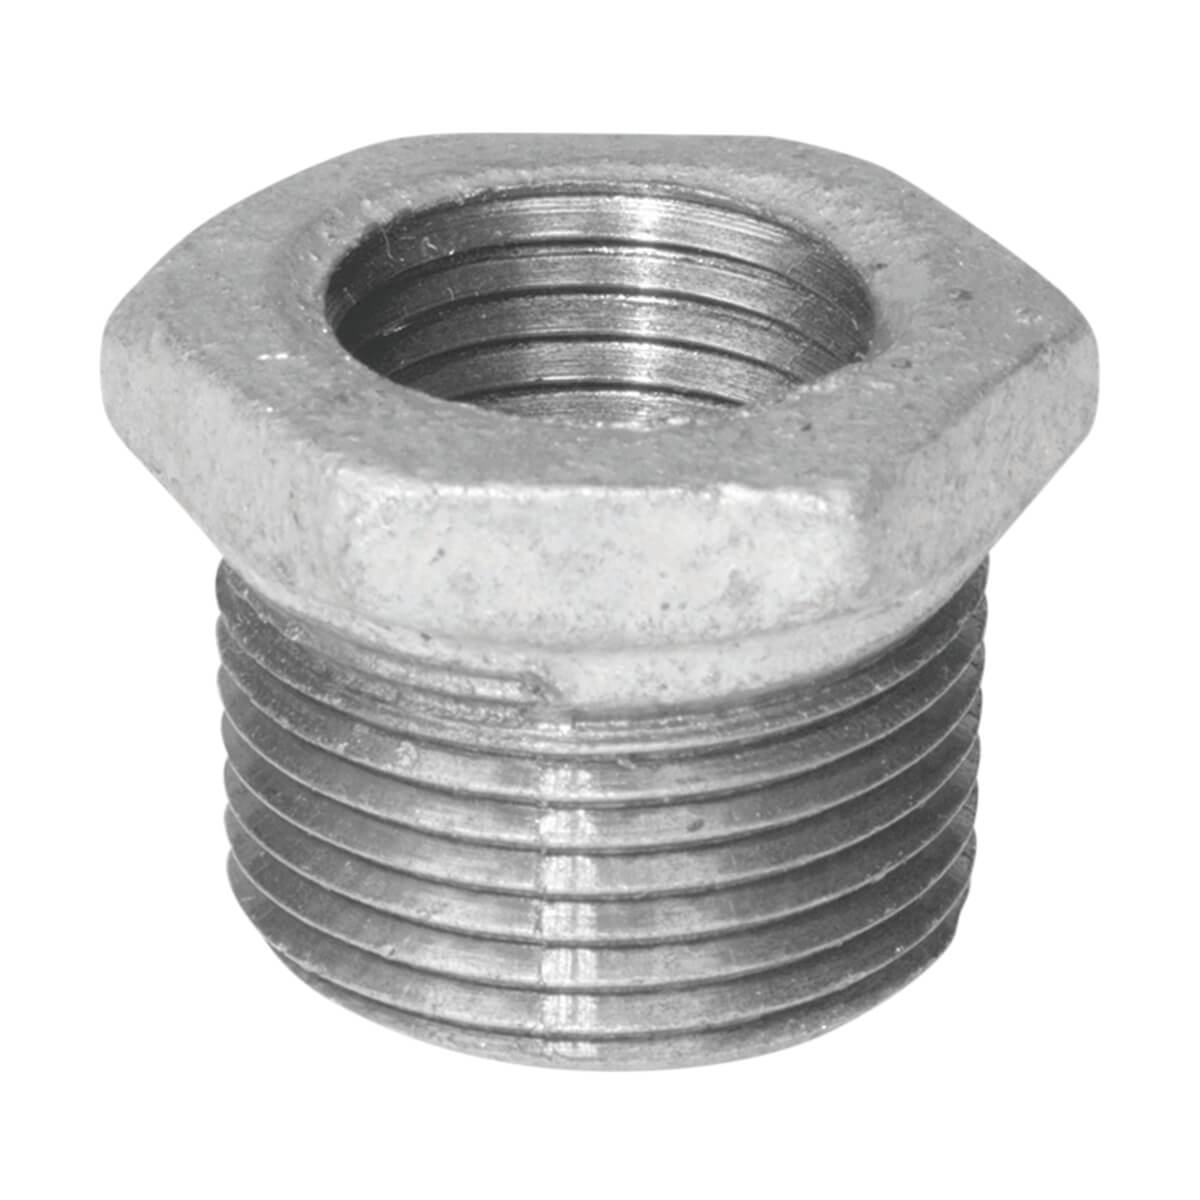 Fitting Galvanized Iron Hex Bushing - 1-1/2-in x 1/2-in